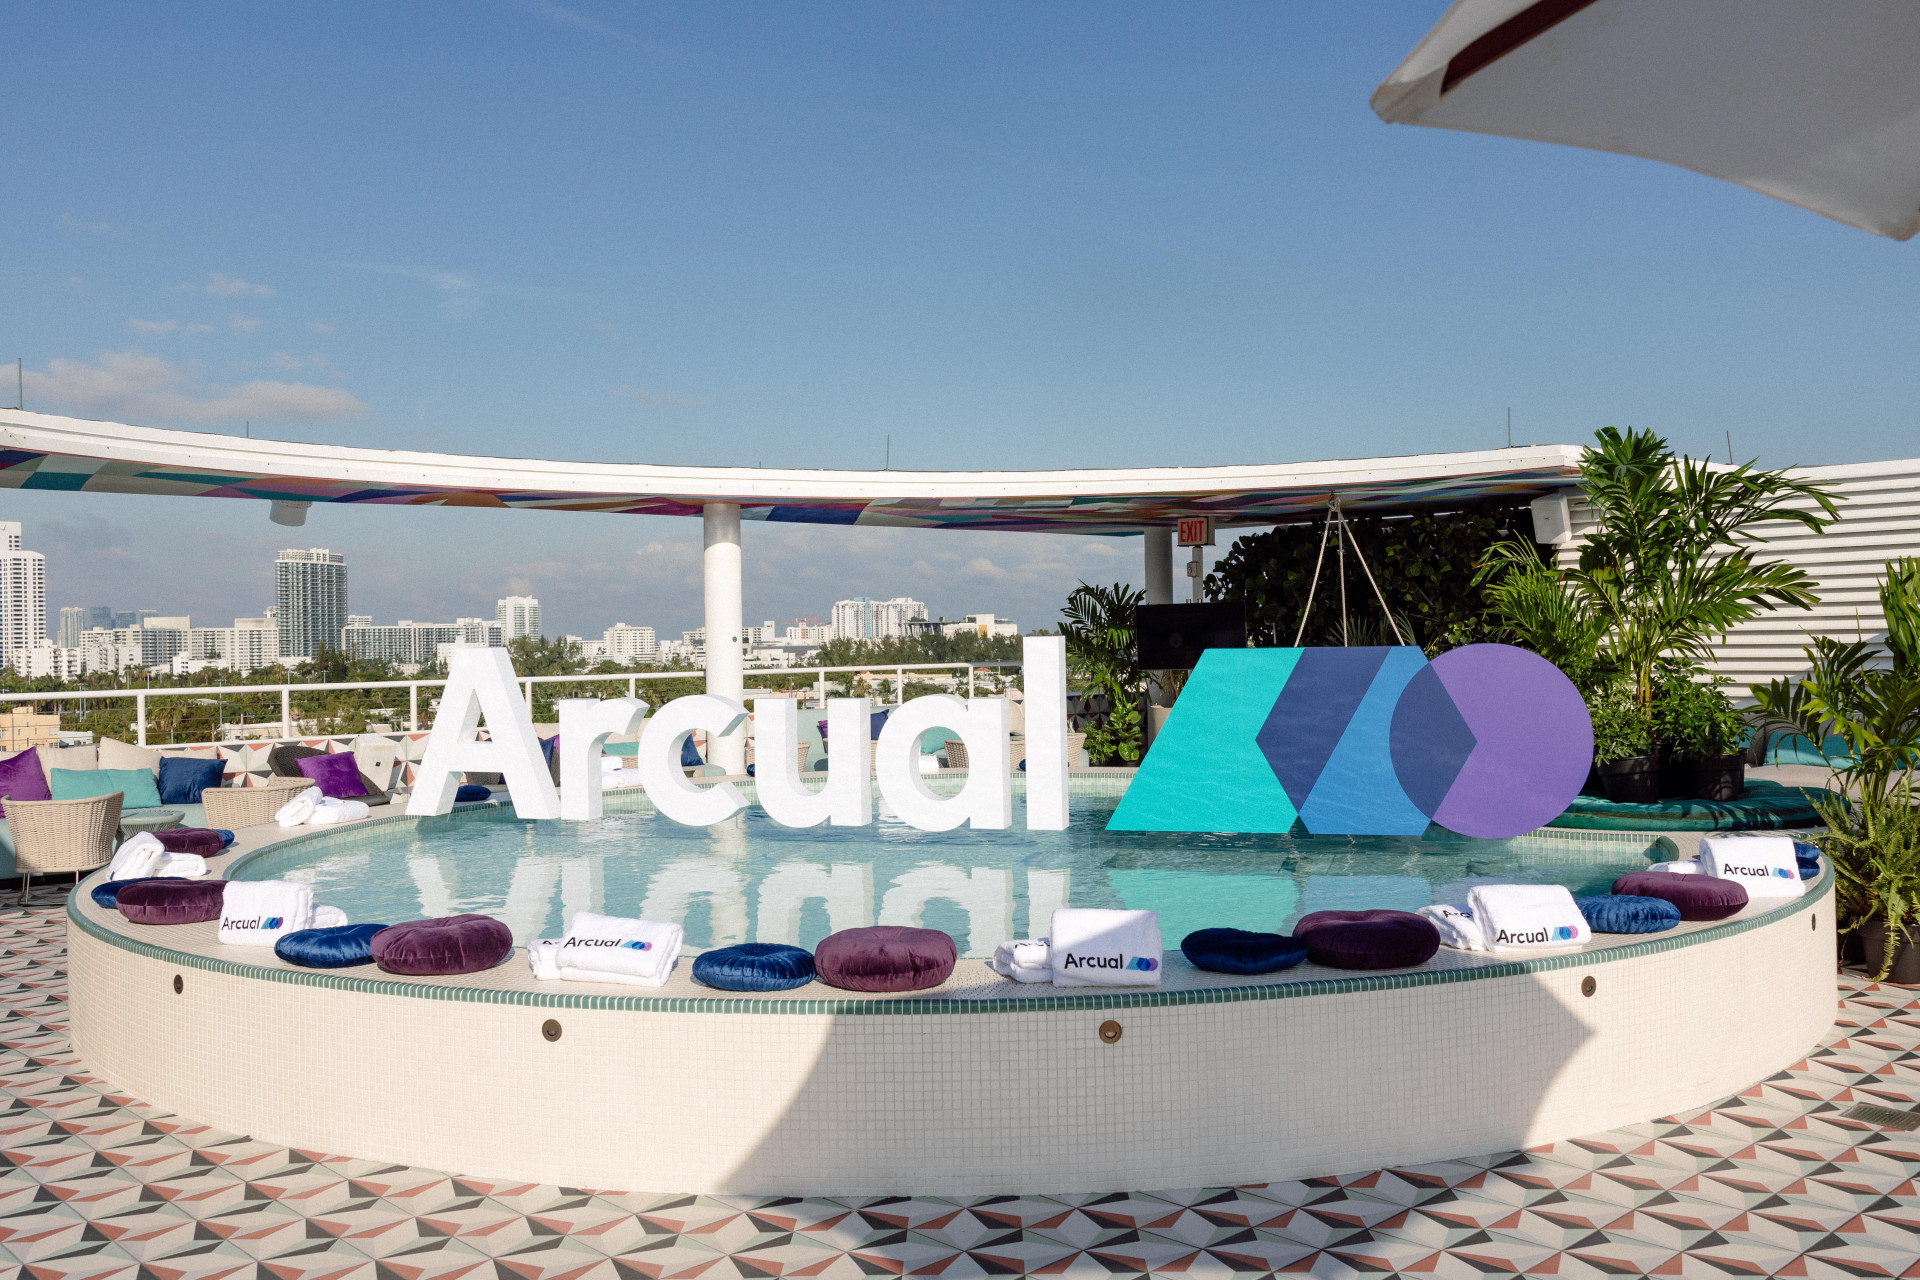 A rooftop view of a cushioned platform with the Arcual logo in the background